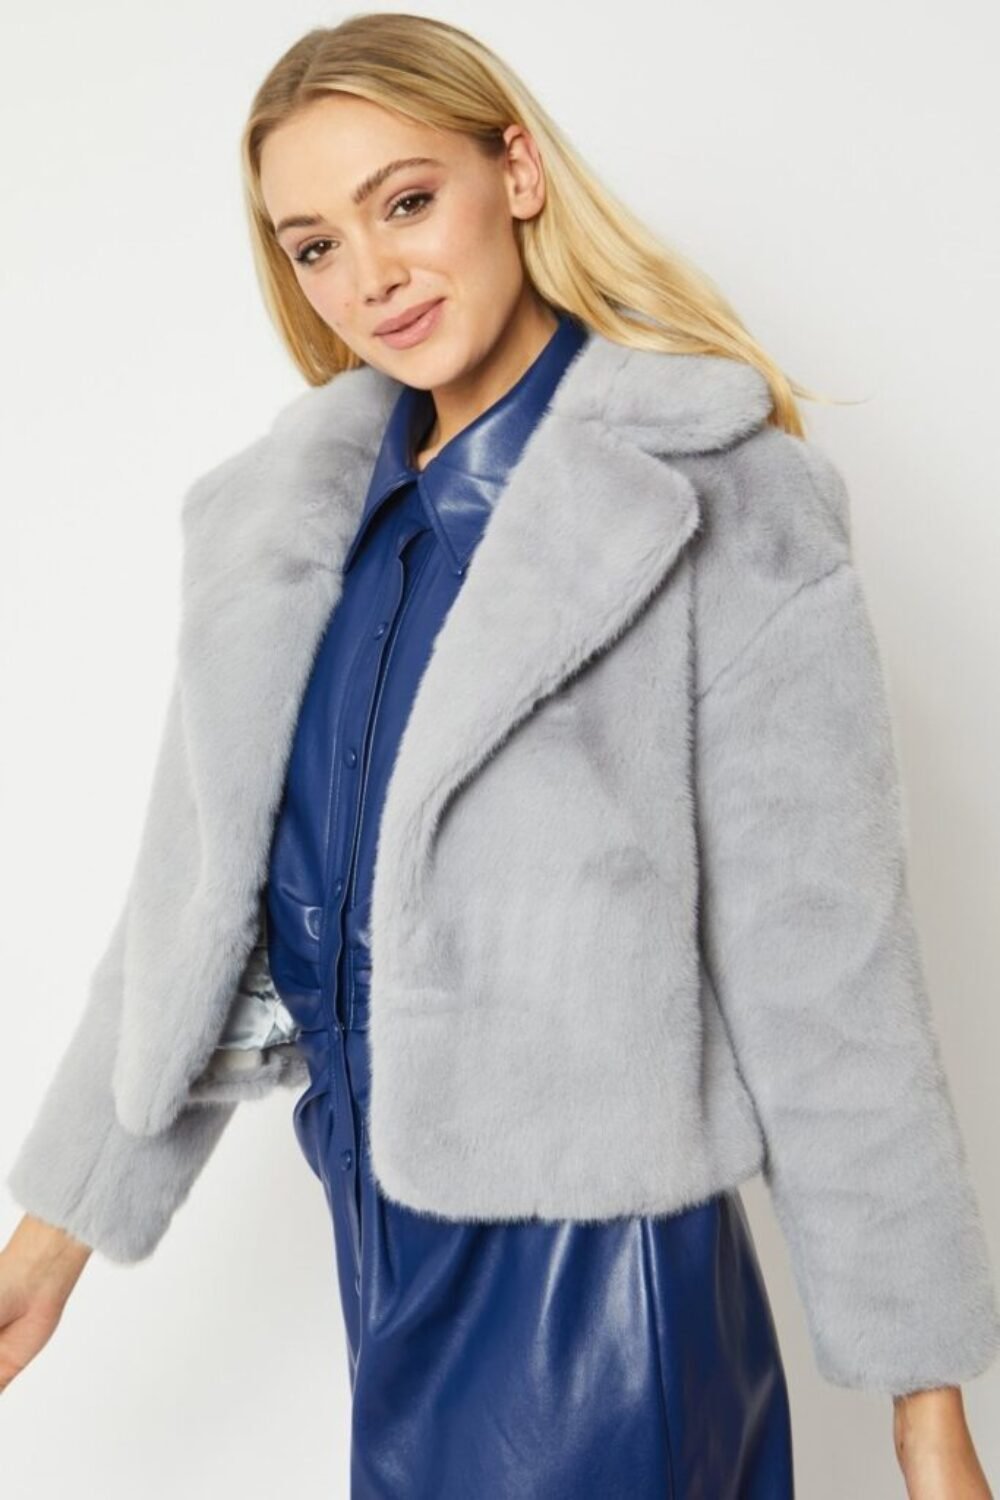 Shop Lux Purple Faux Fur Cropped Coat and women's luxury and designer clothes at www.lux-apparel.co.uk